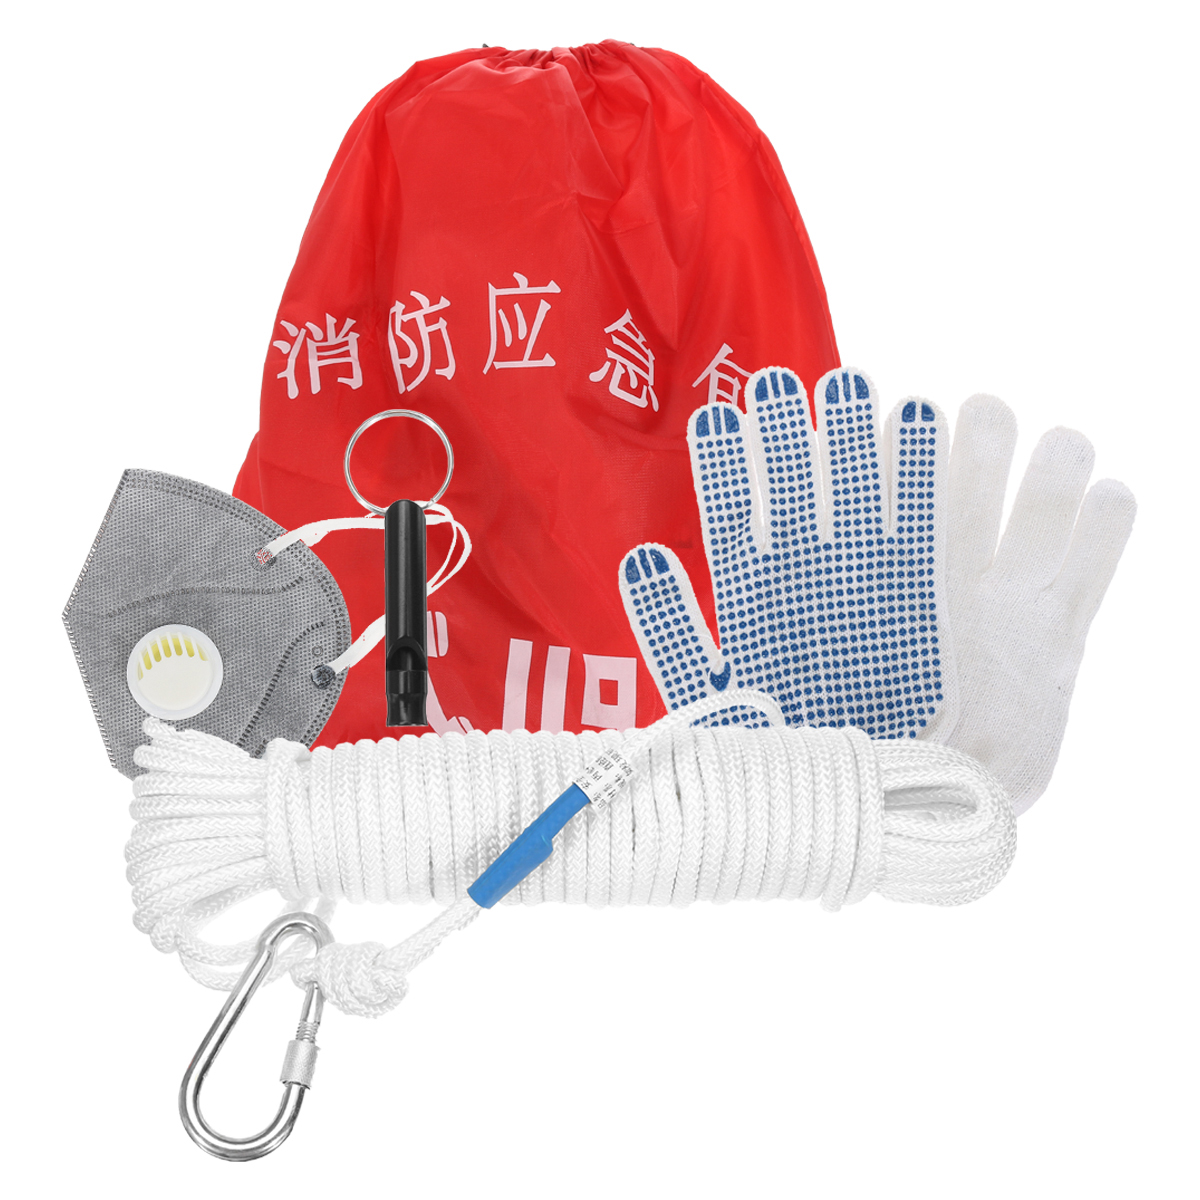 Fire-Emergency-Survival-Kits-Safety-Rope-Whistle-Home-Spare-Fire-Escape-Package-Outdoor-Rescue-Tools-1545533-8